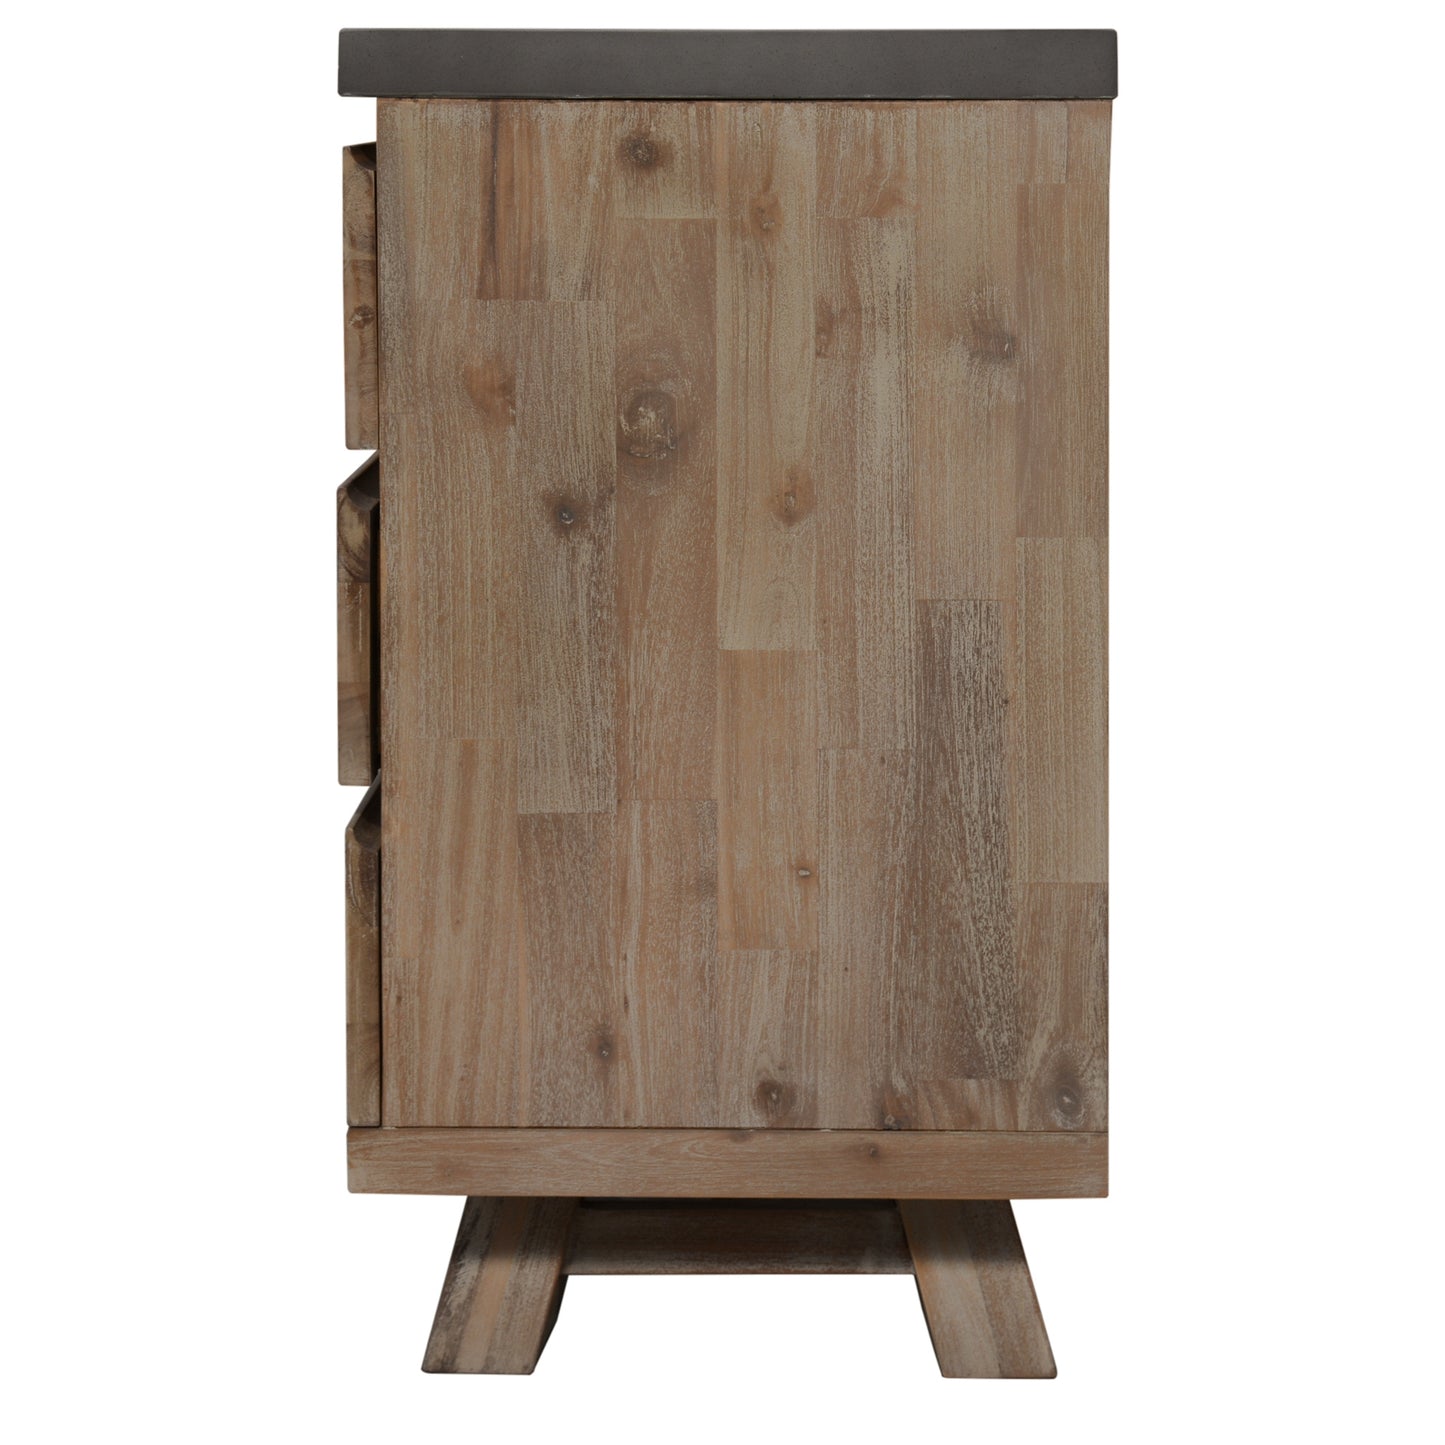 Stony 160cm Acacia Timber Buffet with Concrete Top - Grey